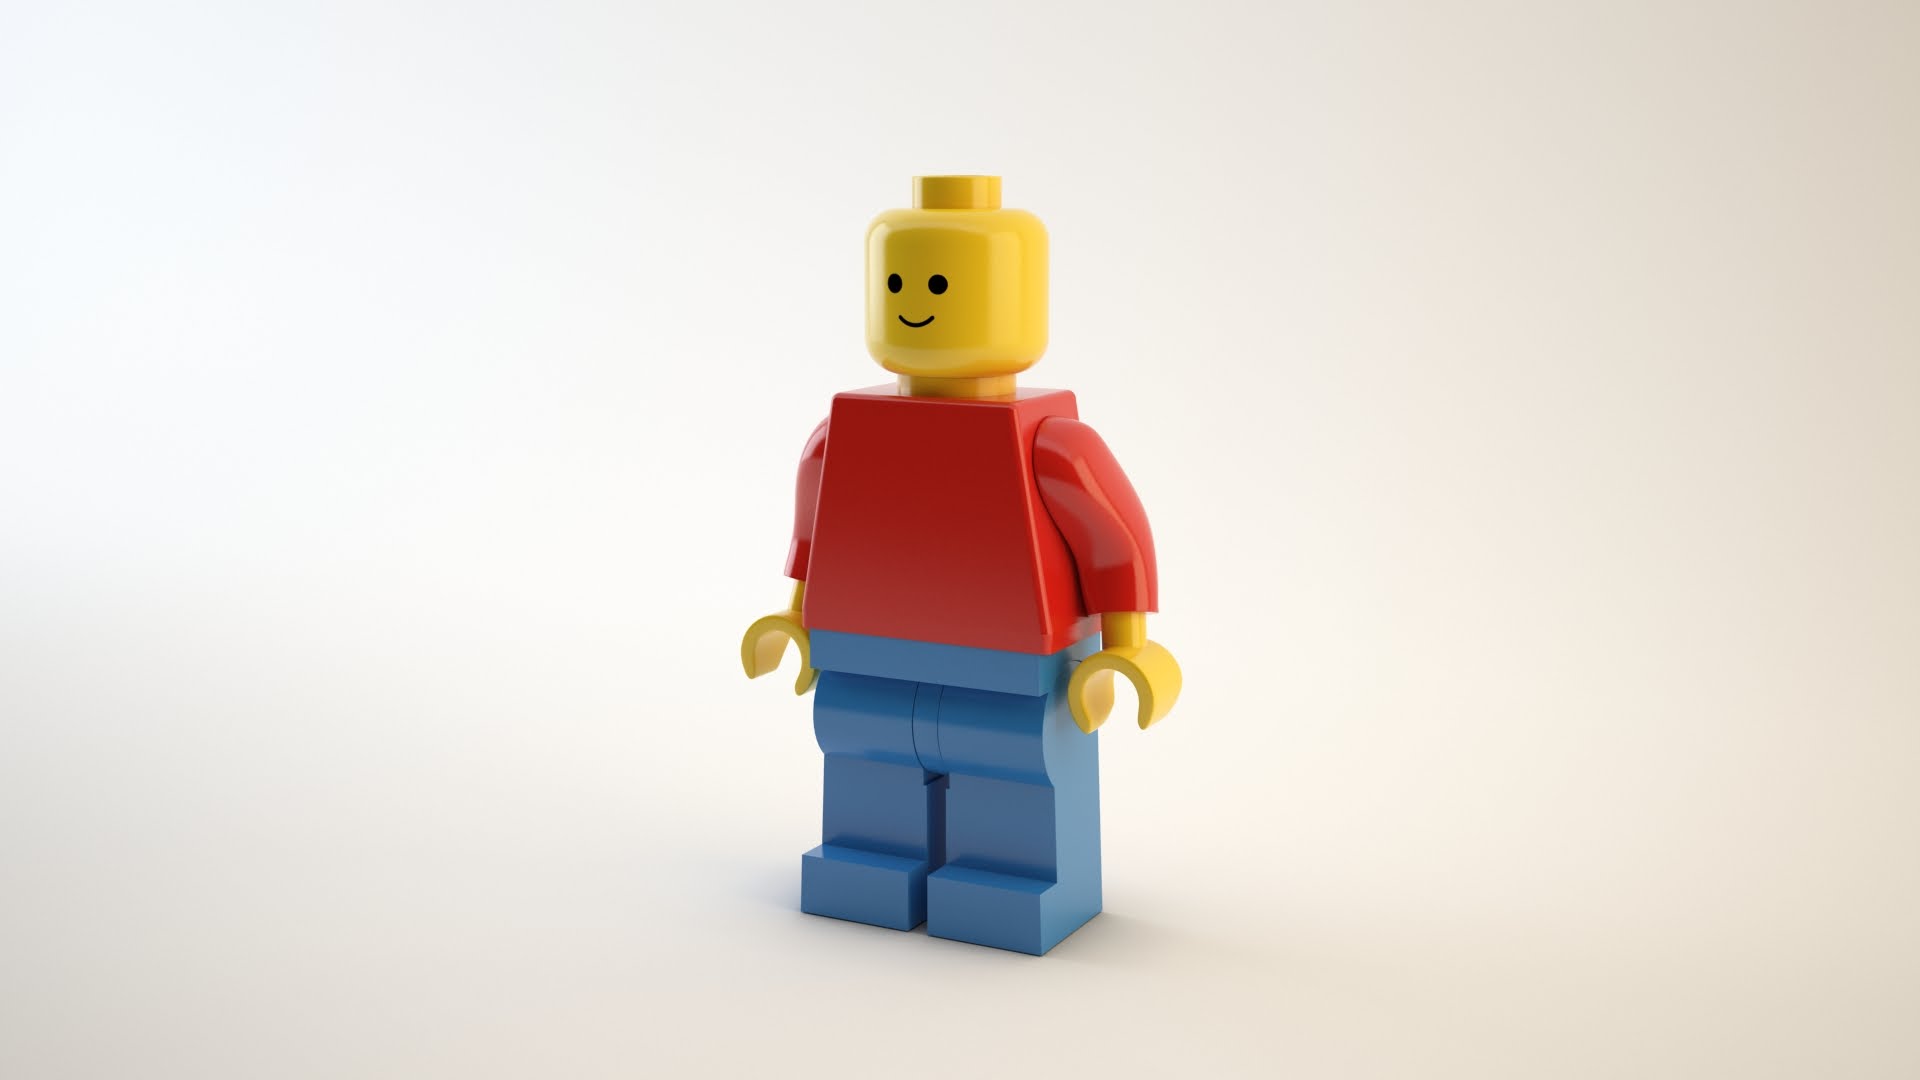 3ds max modeling - LEGO MAN Part2 - YouTube